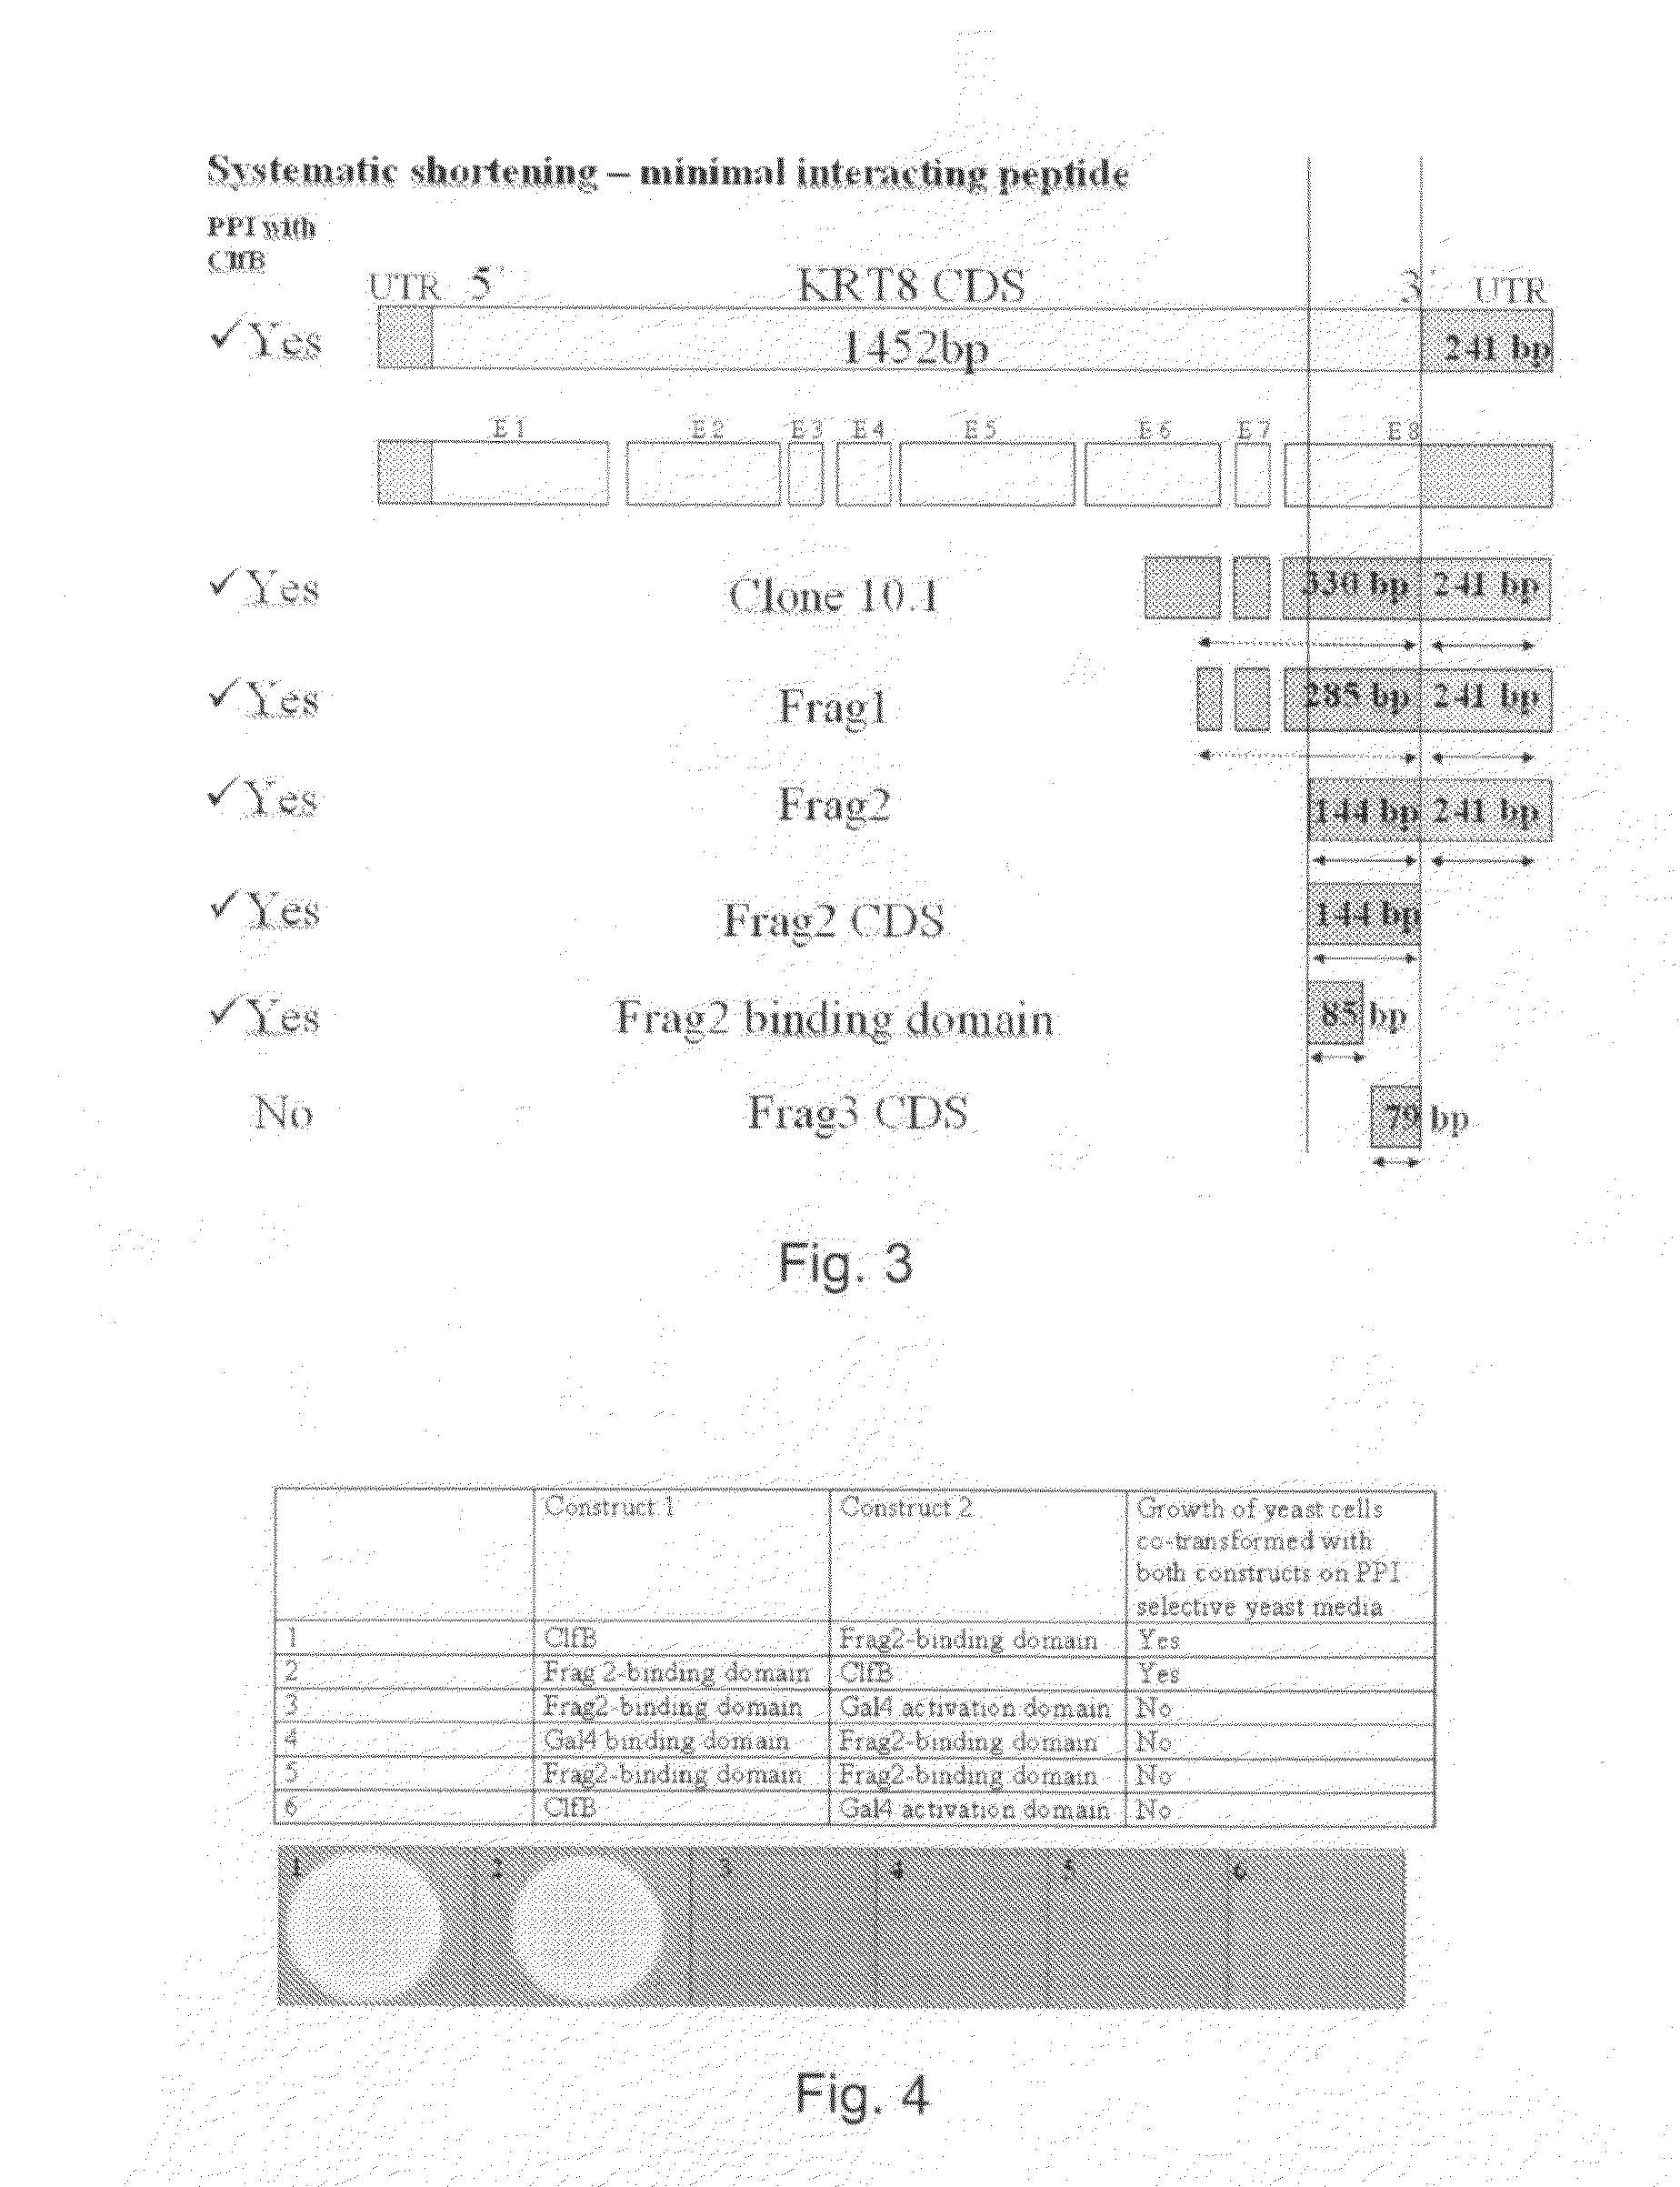 Method for Manufacturing a Modified Peptide